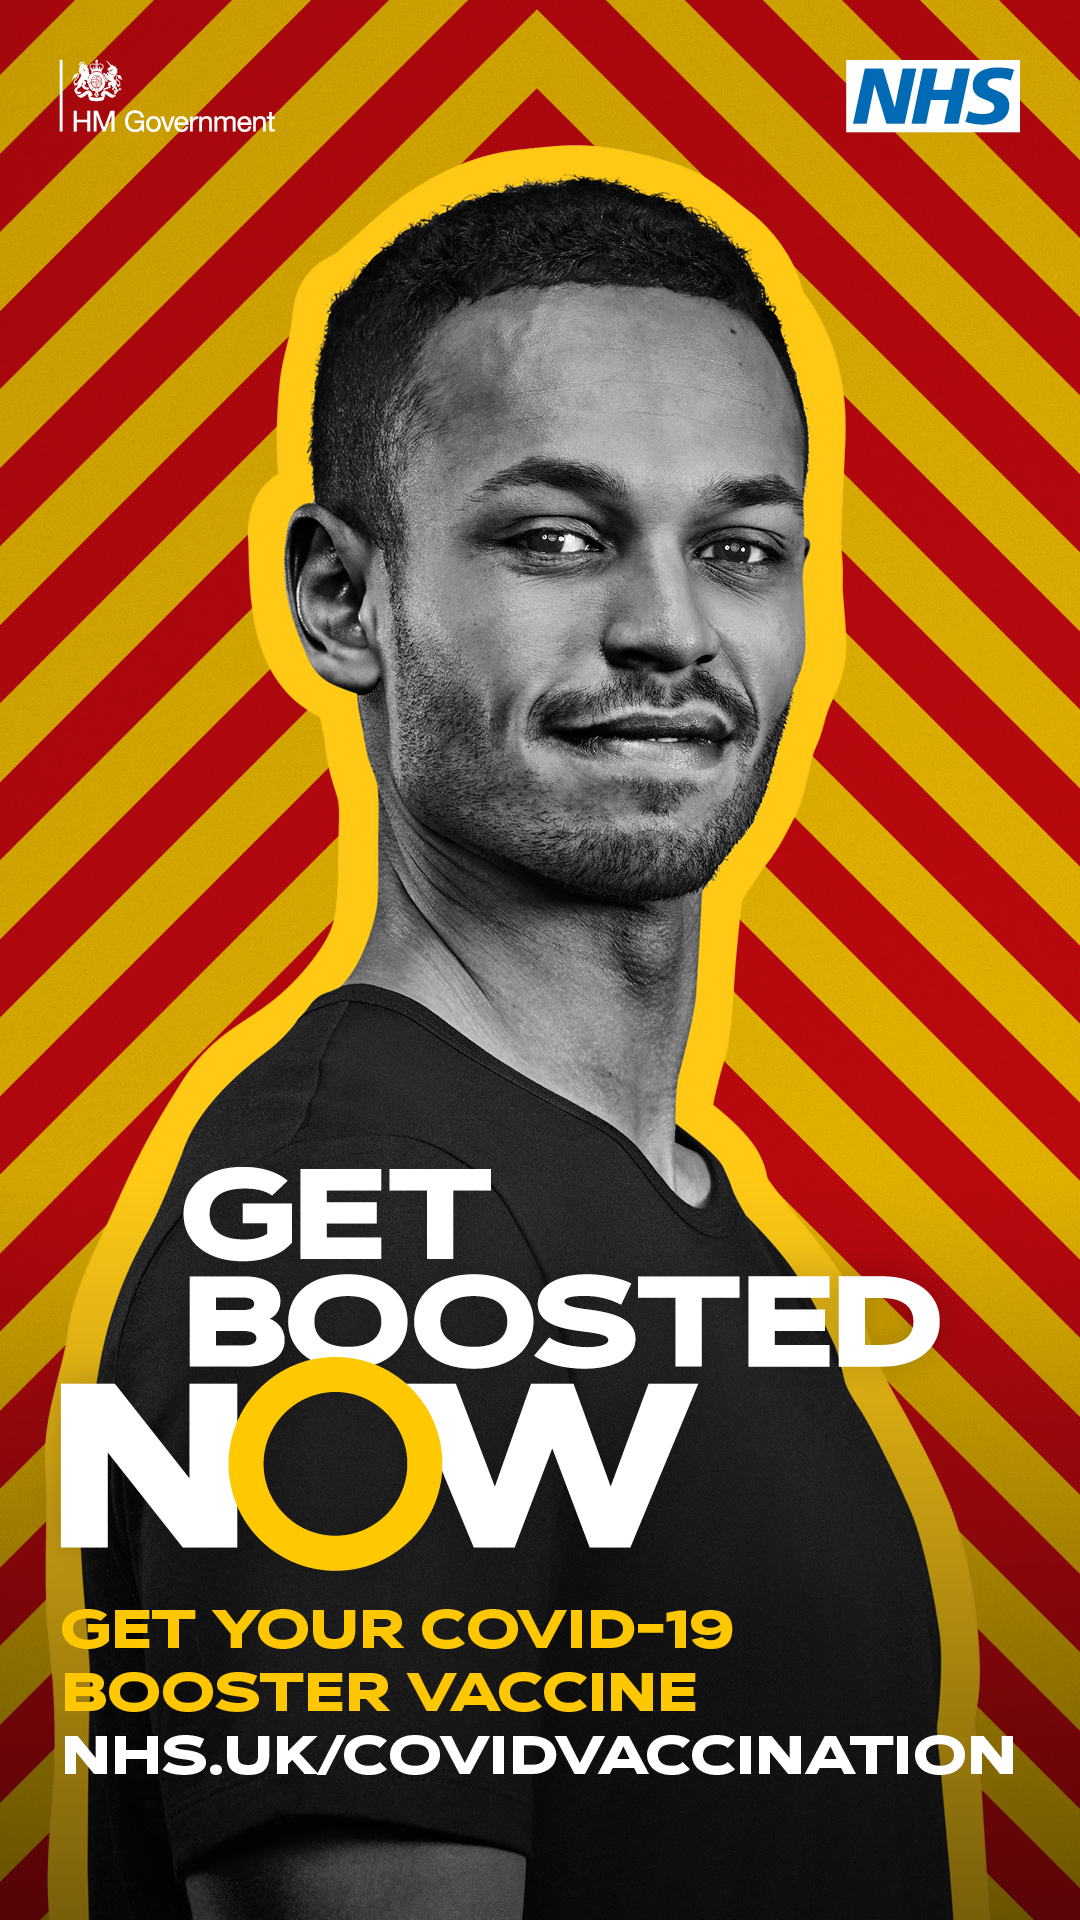 Get boosted now national campaign graphic. Get your COVID-19 booster vaccine by visiting nhs.uk/covidvaccination